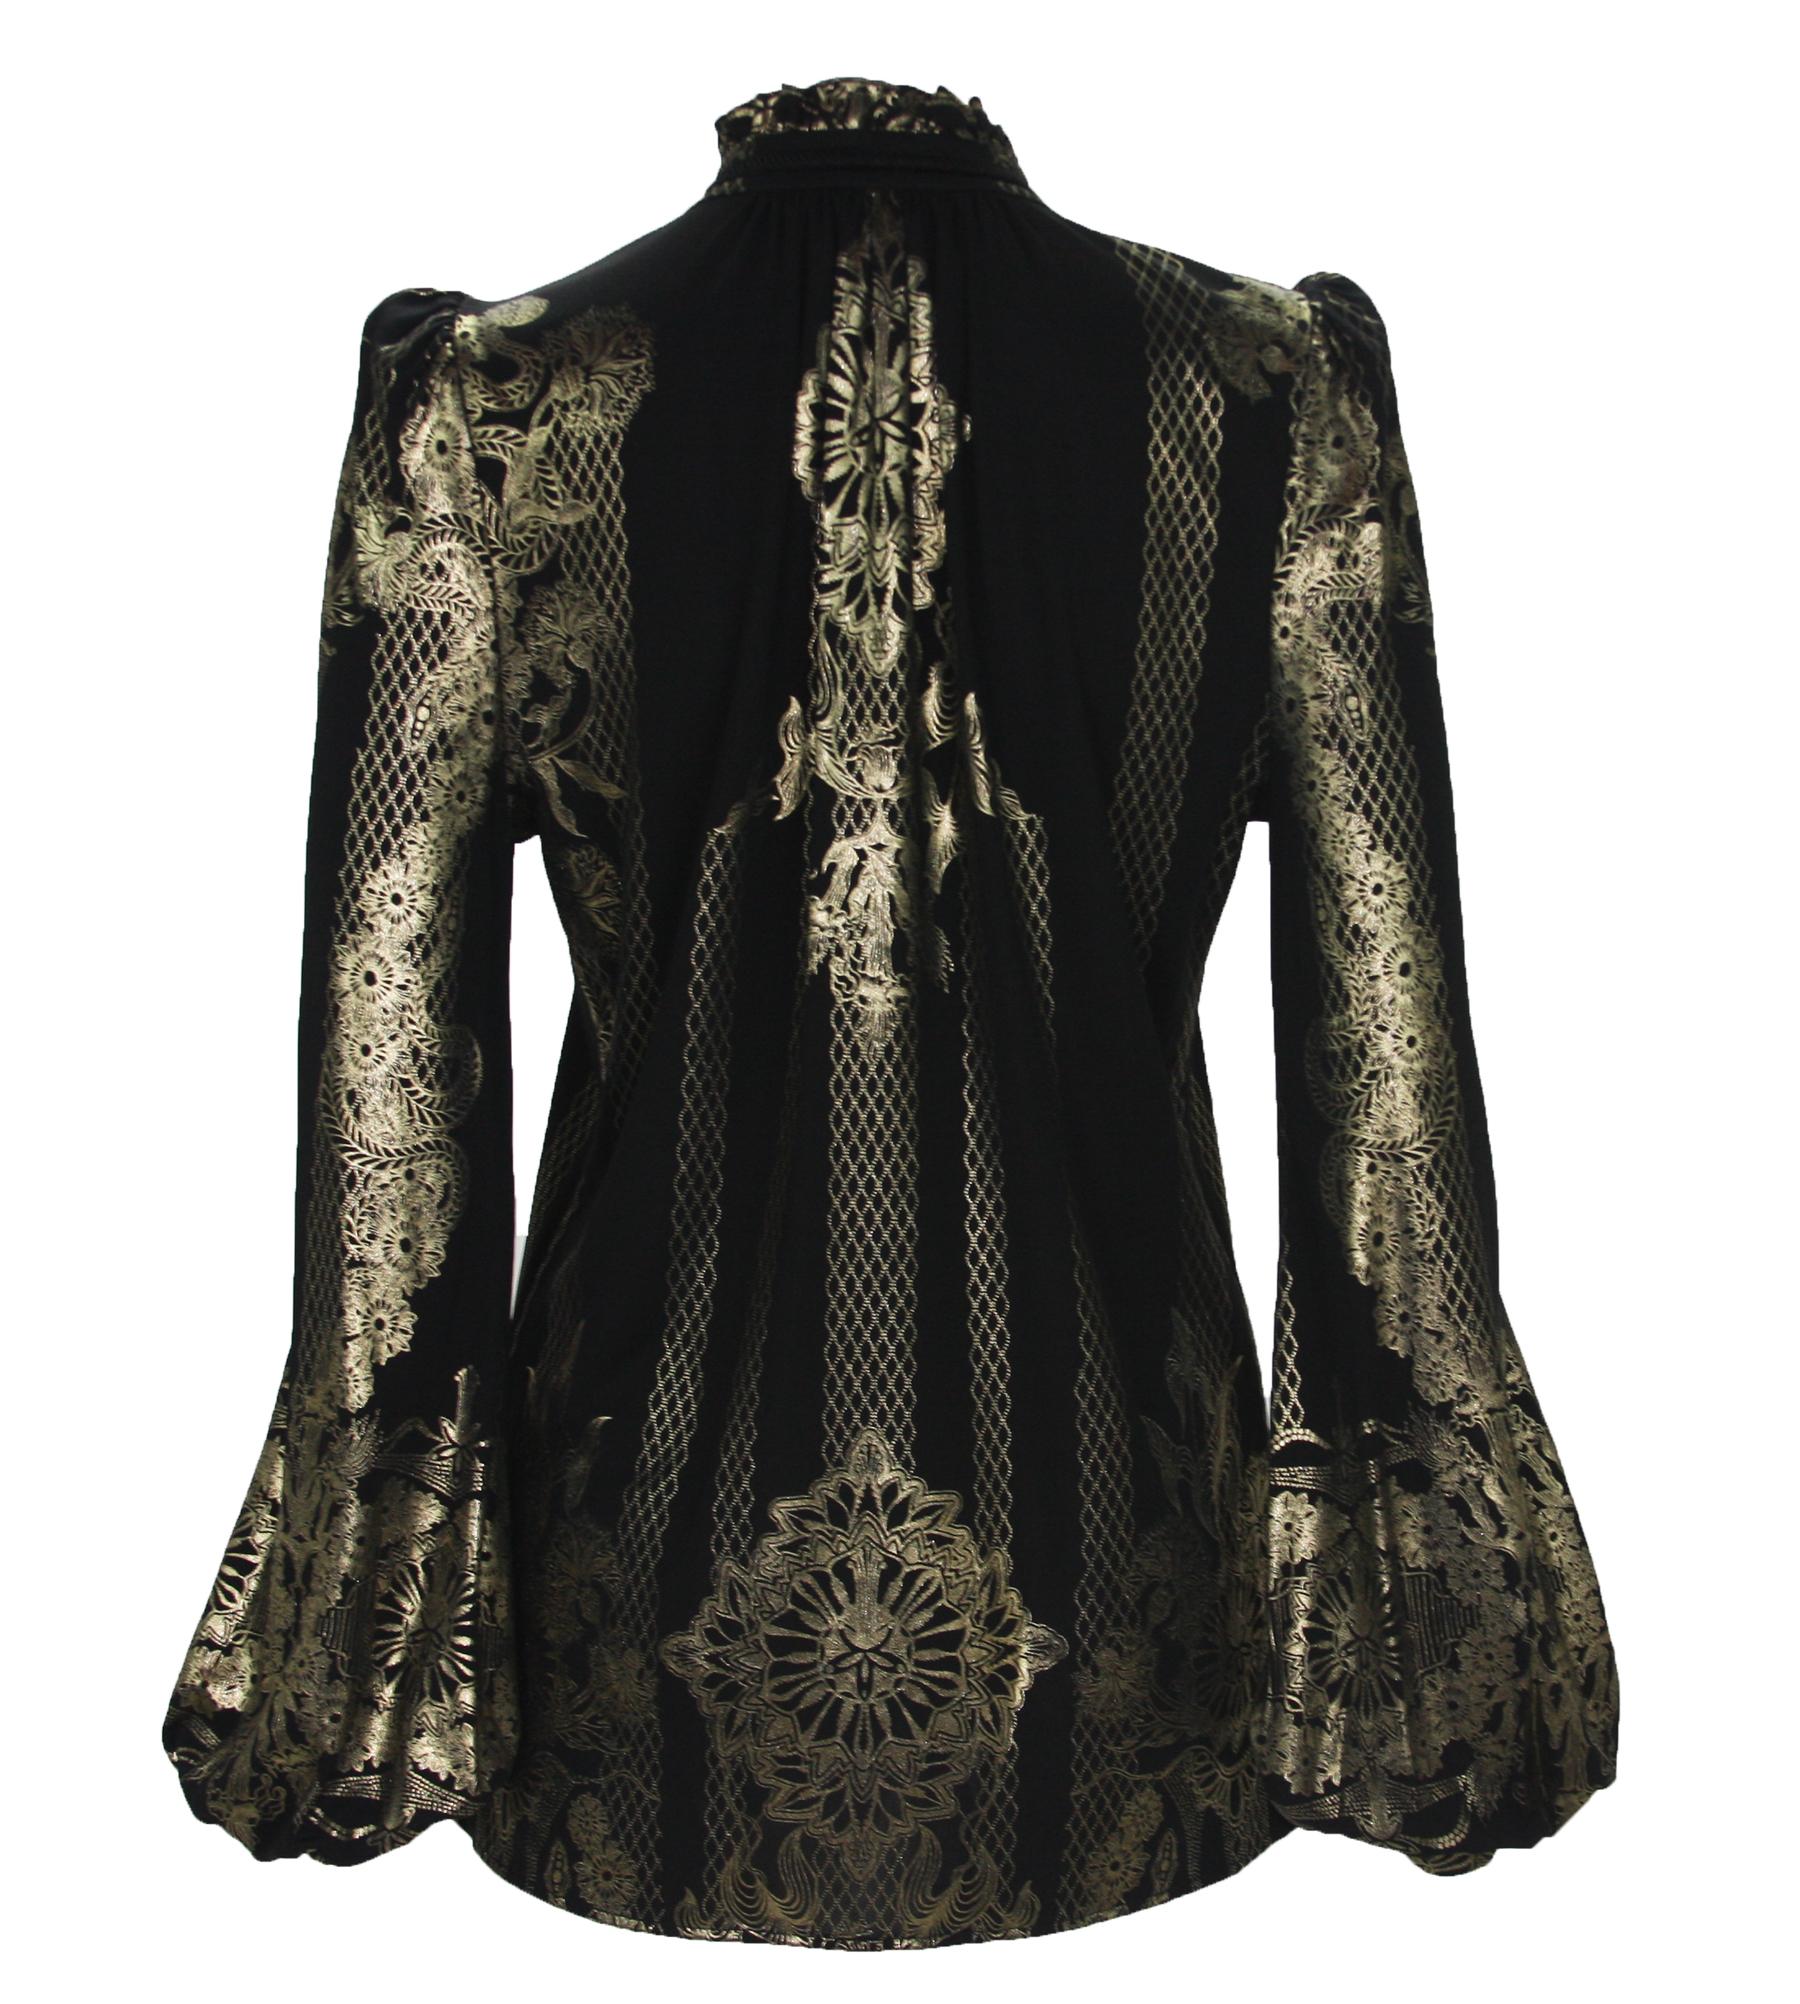 New Roberto Cavalli Gold Print Blouse
Designer size 38 ( oversized - please check measurements)
Black with Gold Print, Long Sleeve, 100% Viscose, Toggle Button Closure.
Measurements: Length - 27 inches, Bust - 36/38